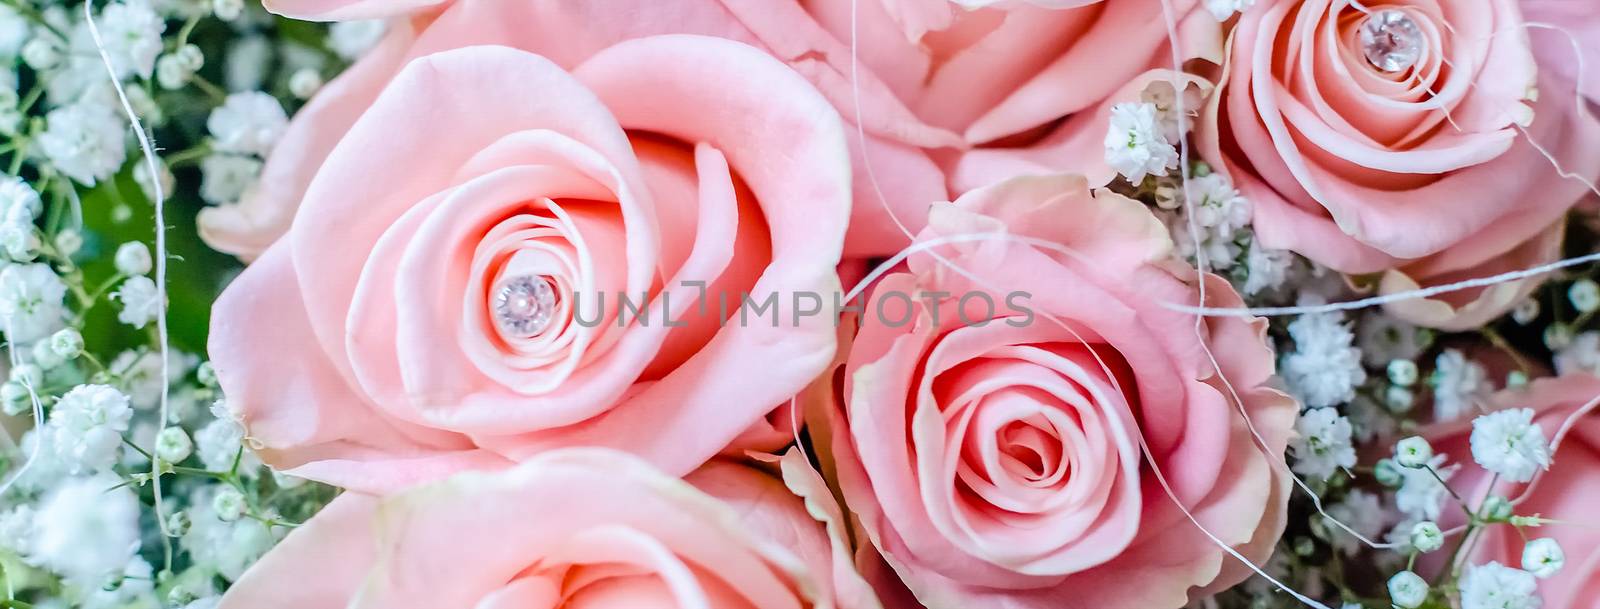 Bouquet of pink roses with small briliants. Romantic concept for Valentine's Day